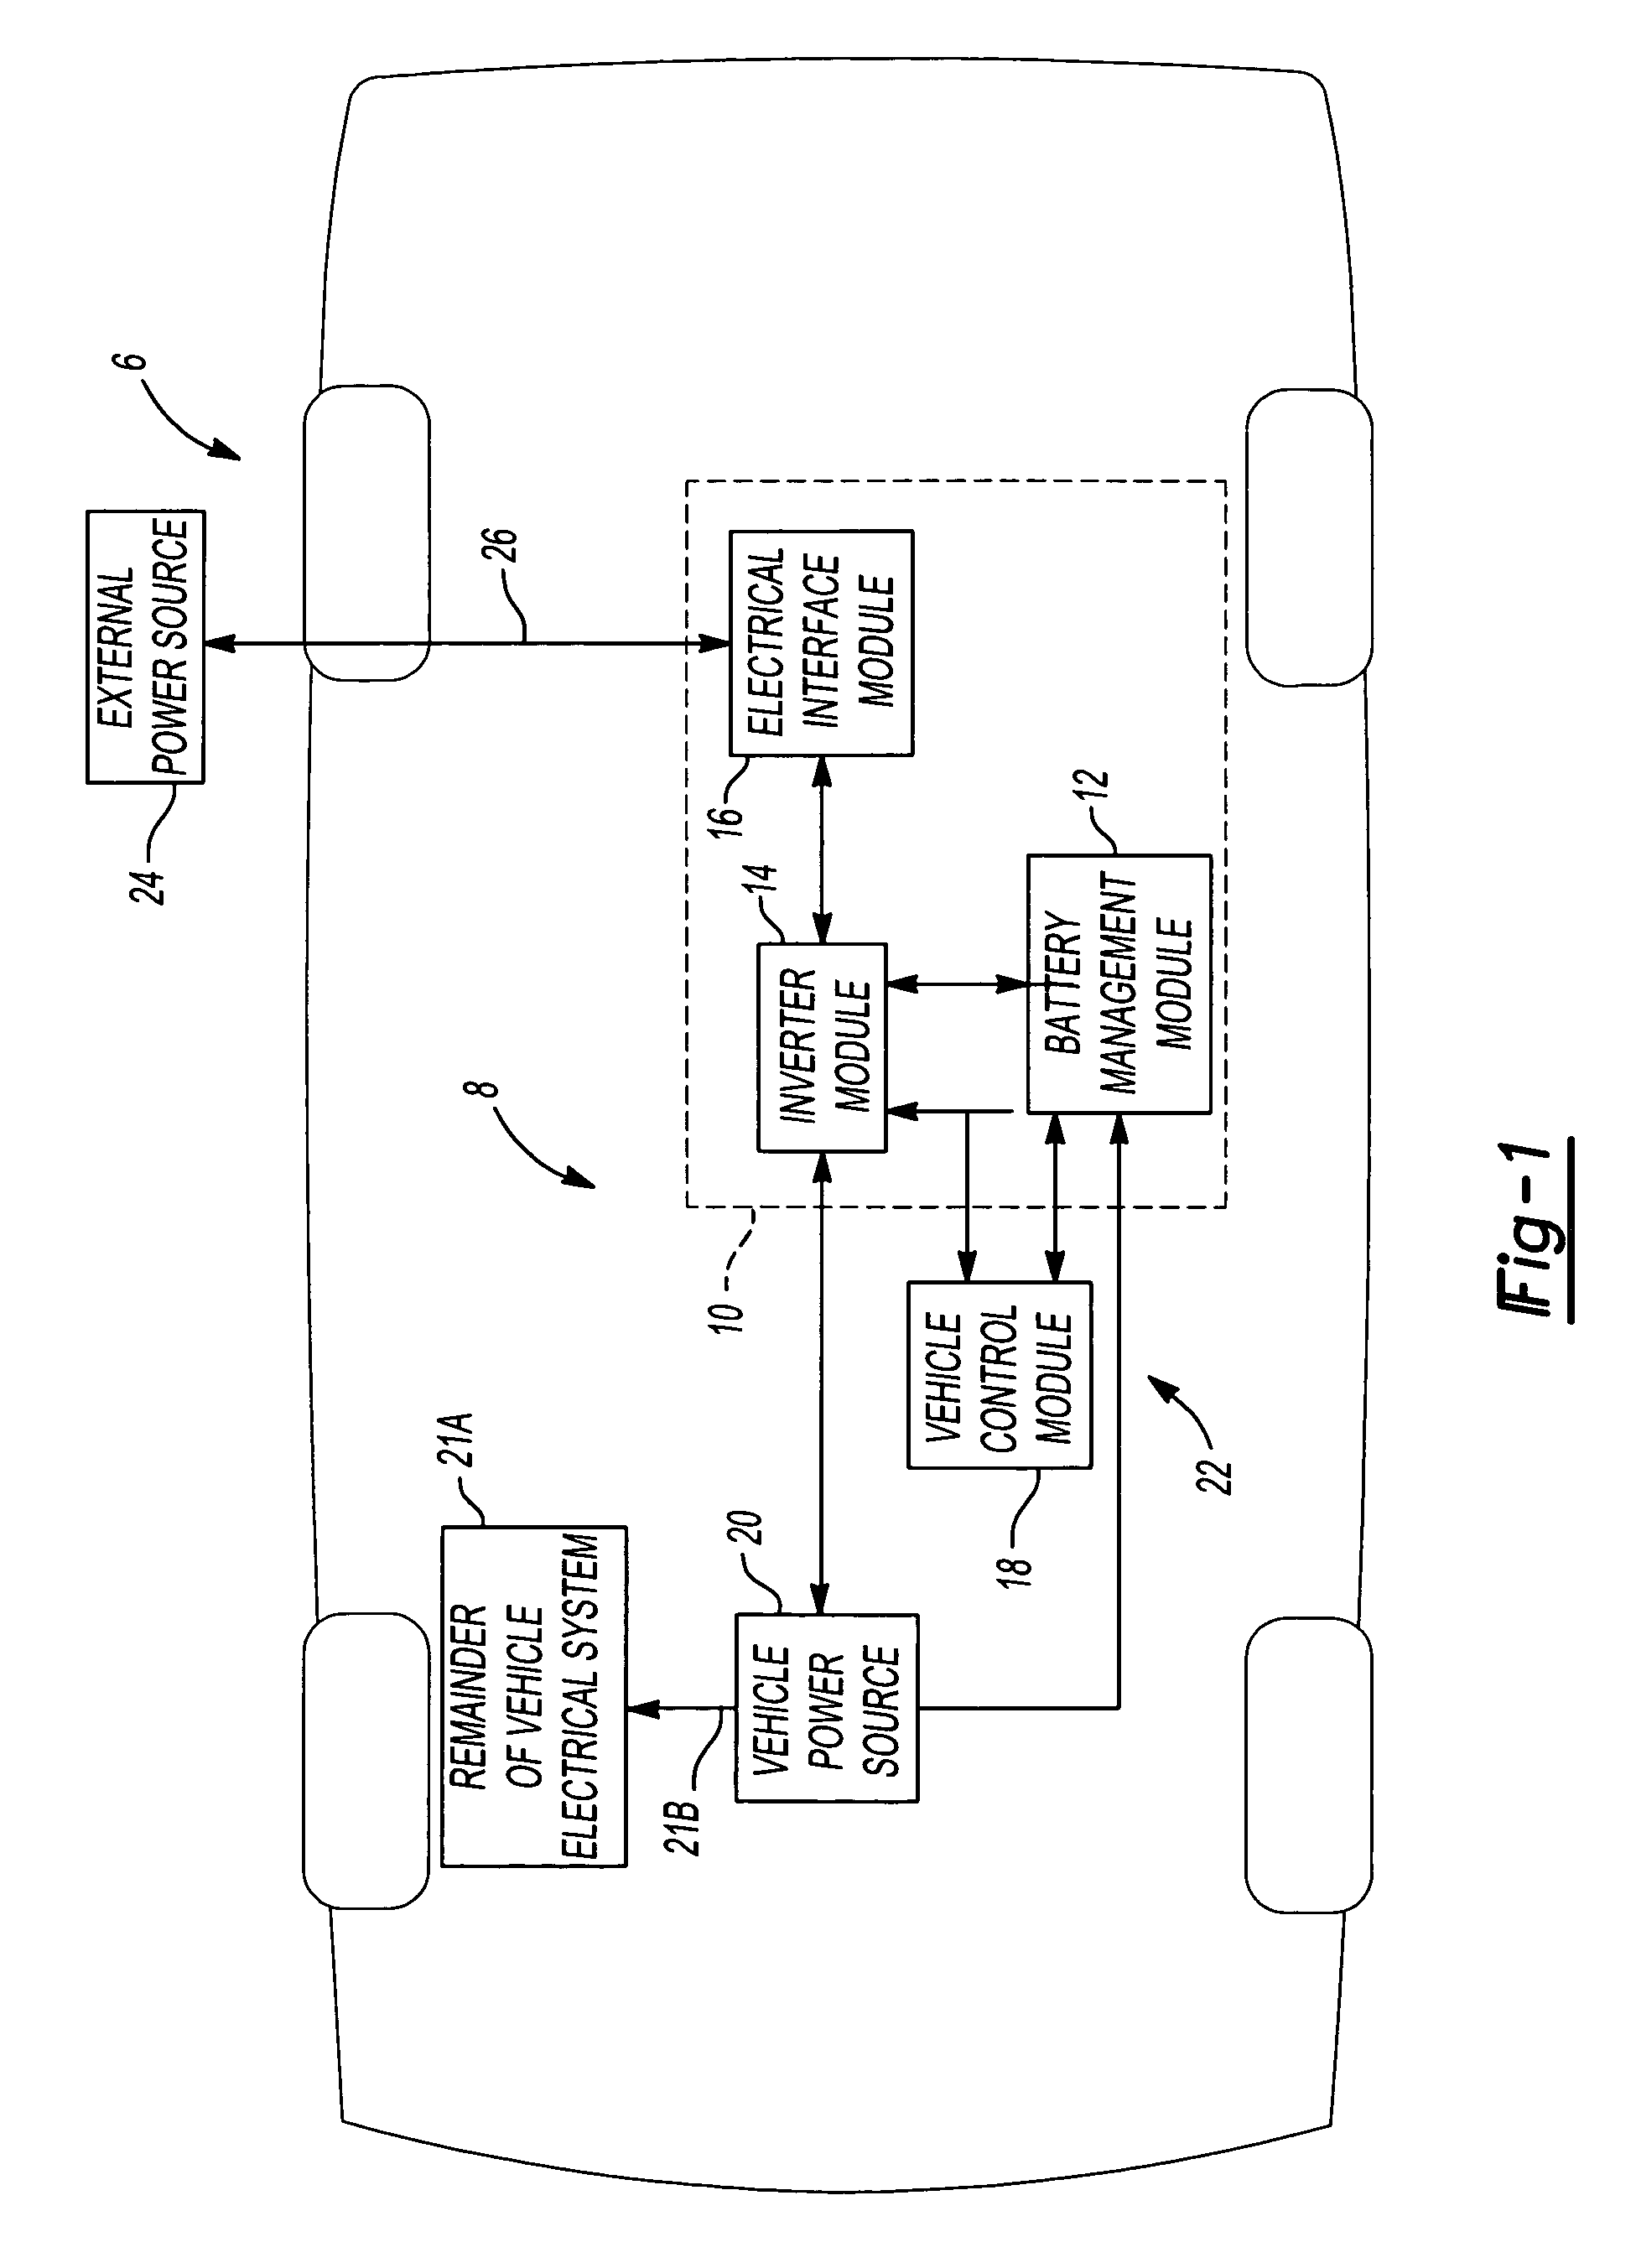 Bi-directional inverter control for high voltage charge/discharge for automobiles